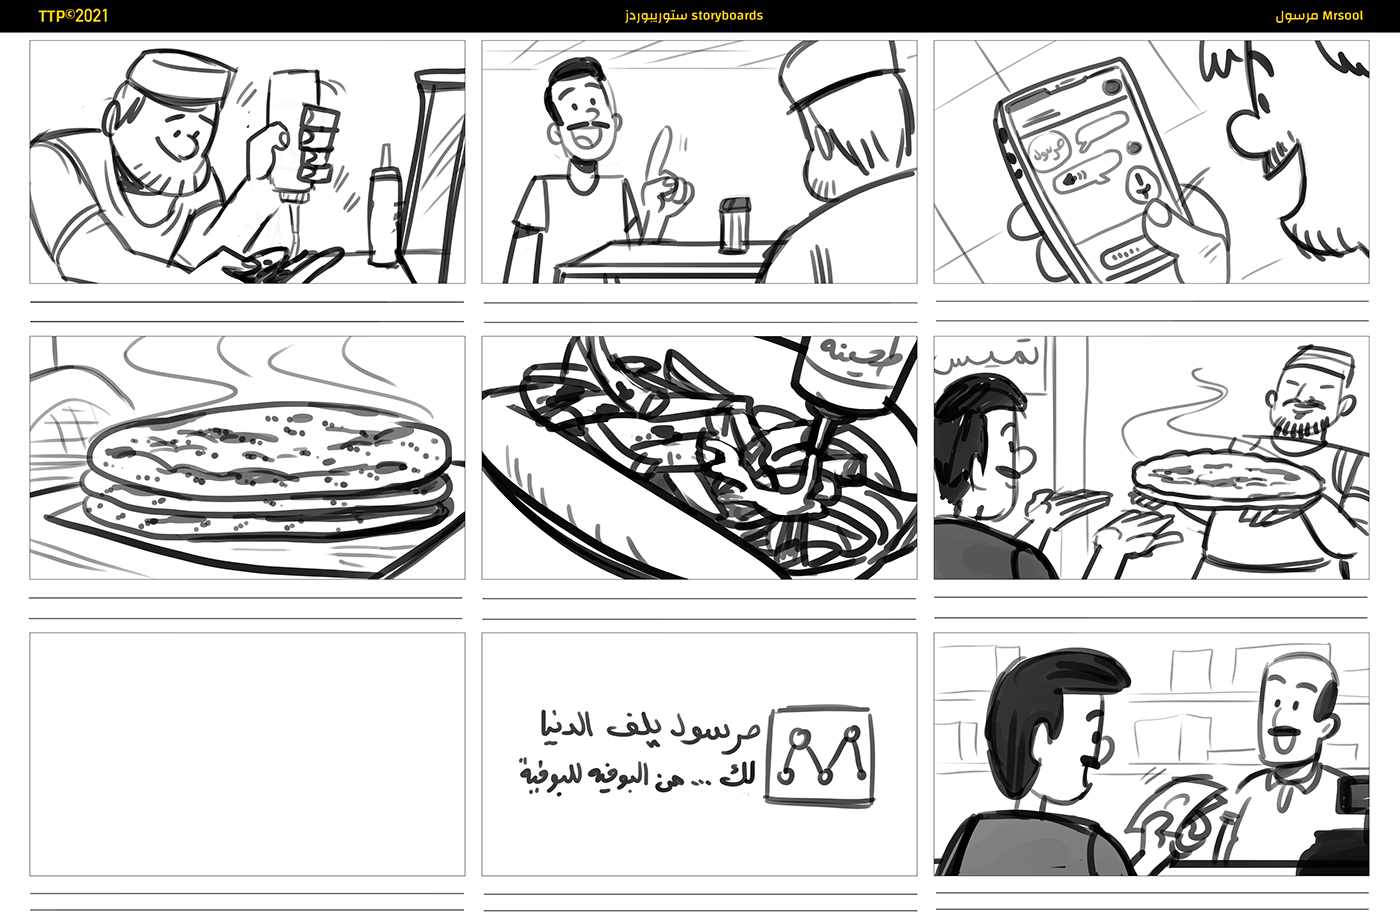 commercial concepts drawings ideas ideation mrsool pitch Saudi sketch Storyboards